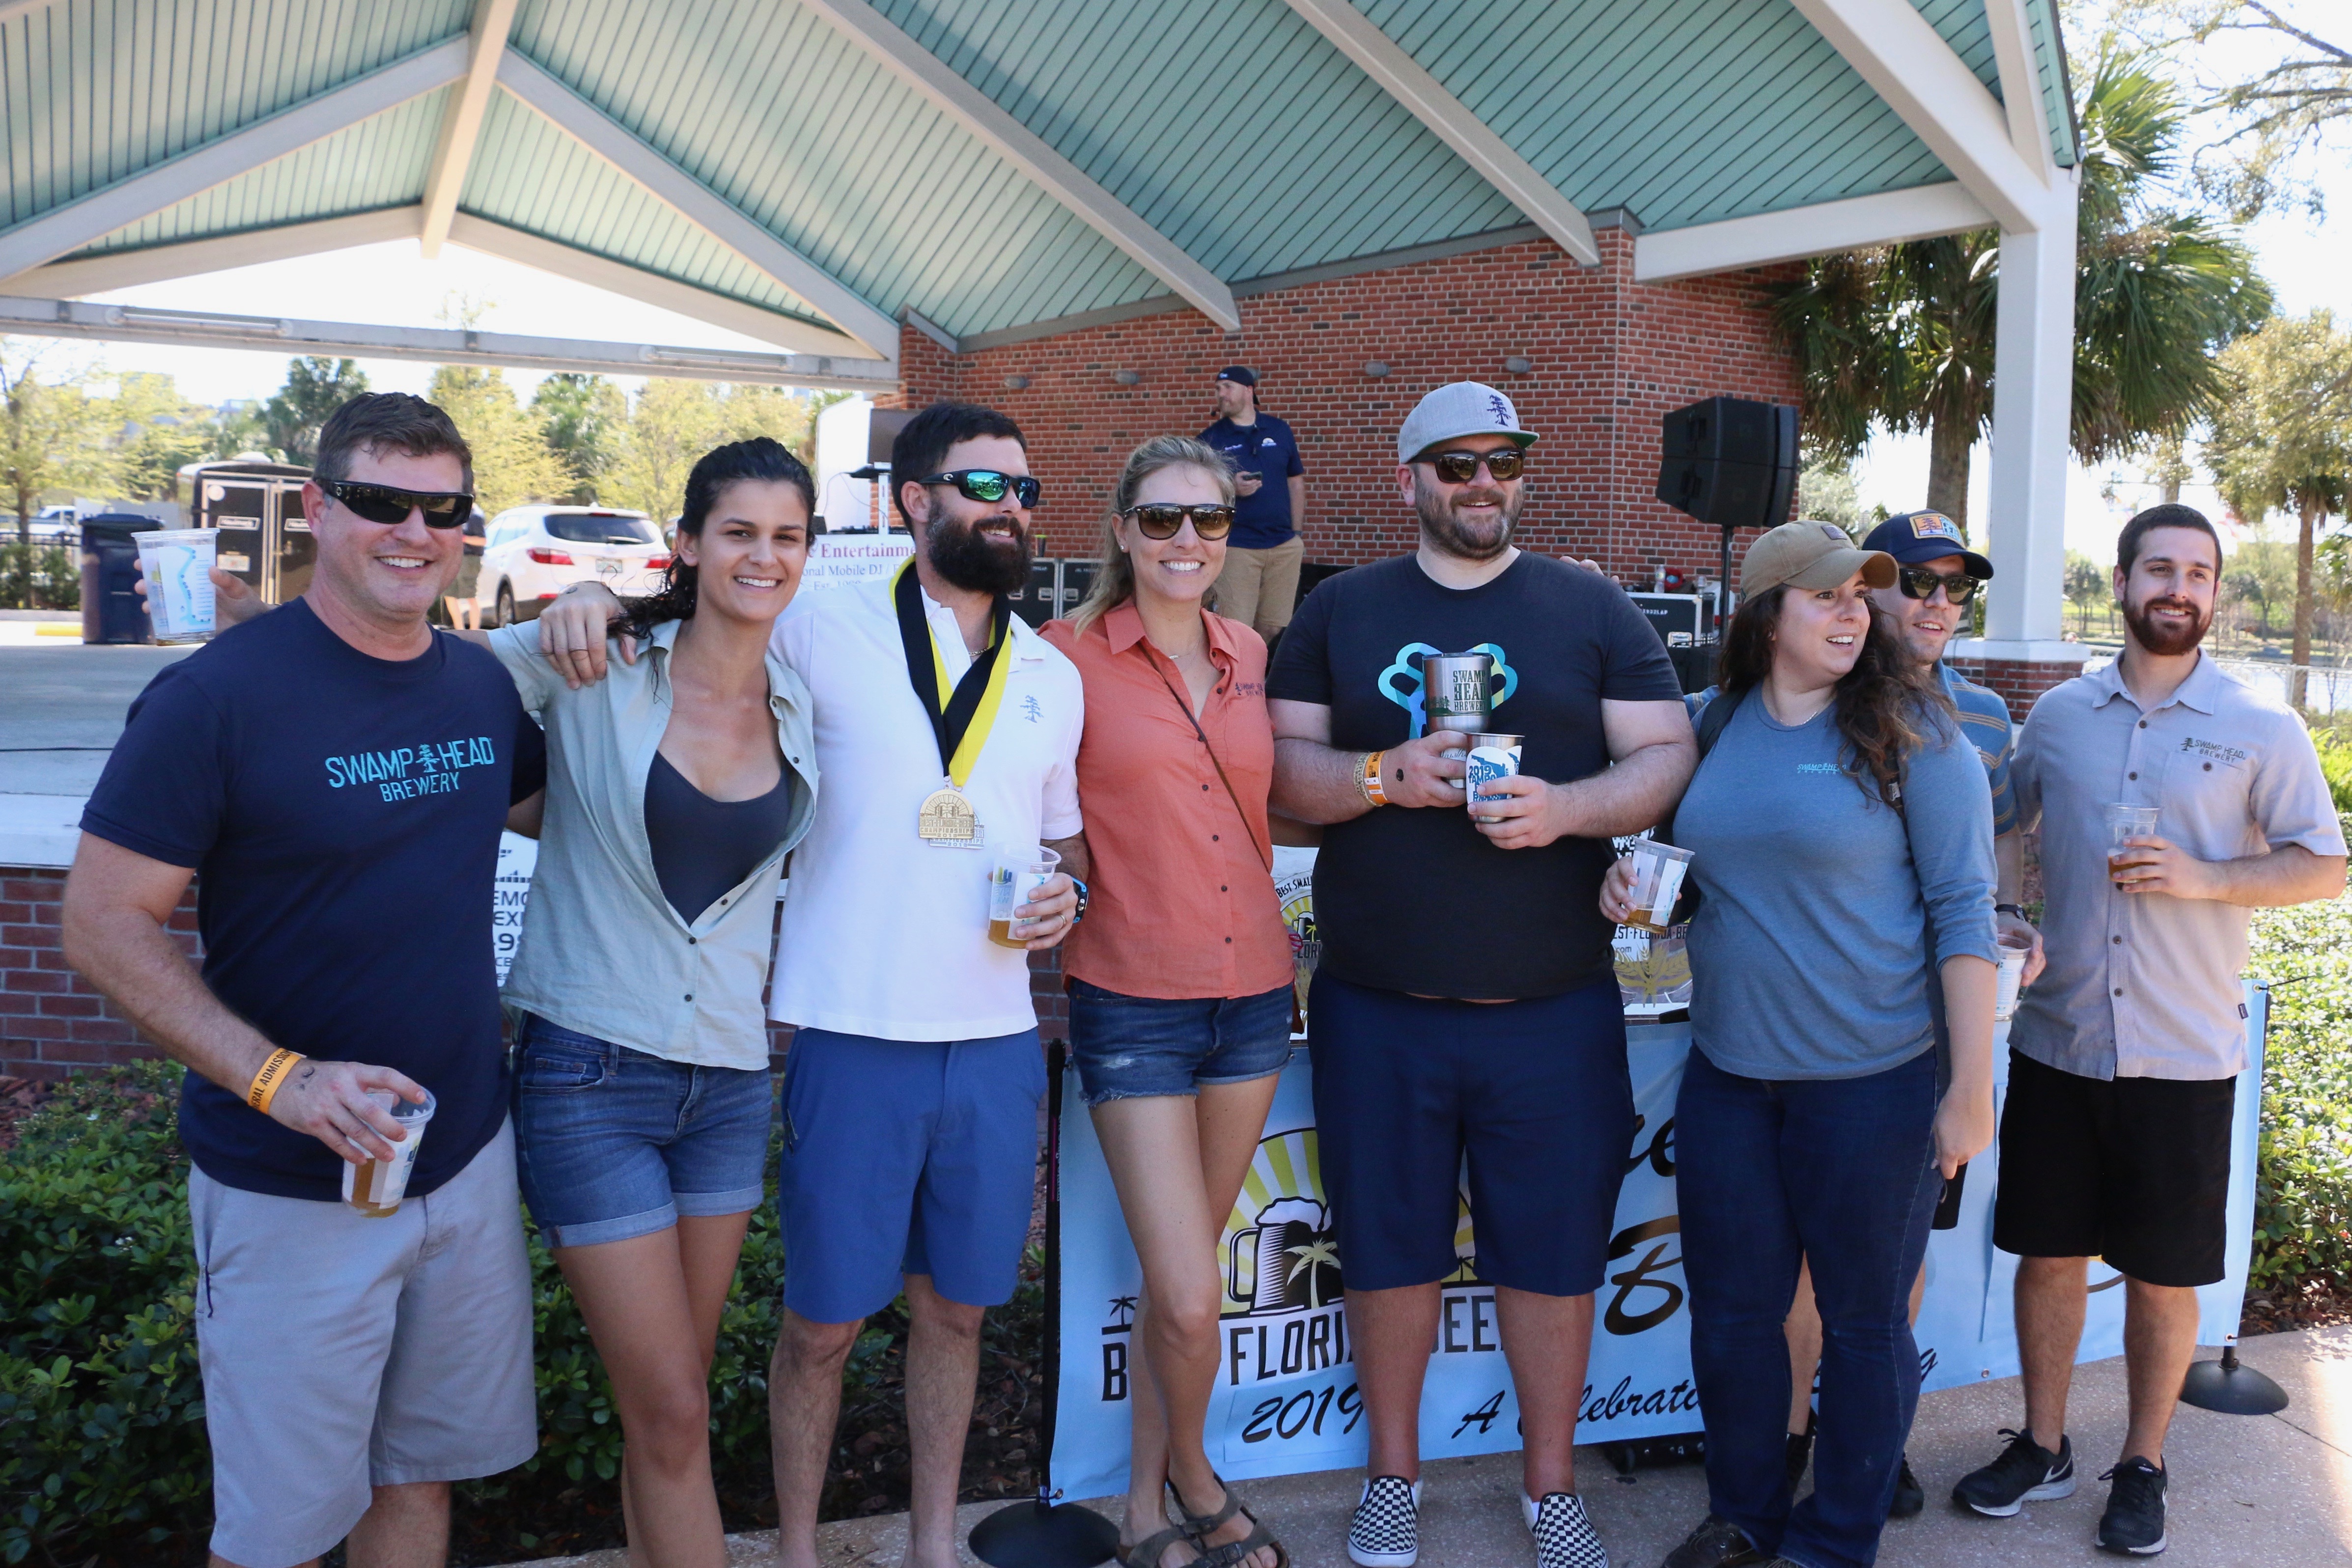 Group from Swamp Head Brewery poses after winning a medal at Best Florida Beer's Brewers Ball 2019